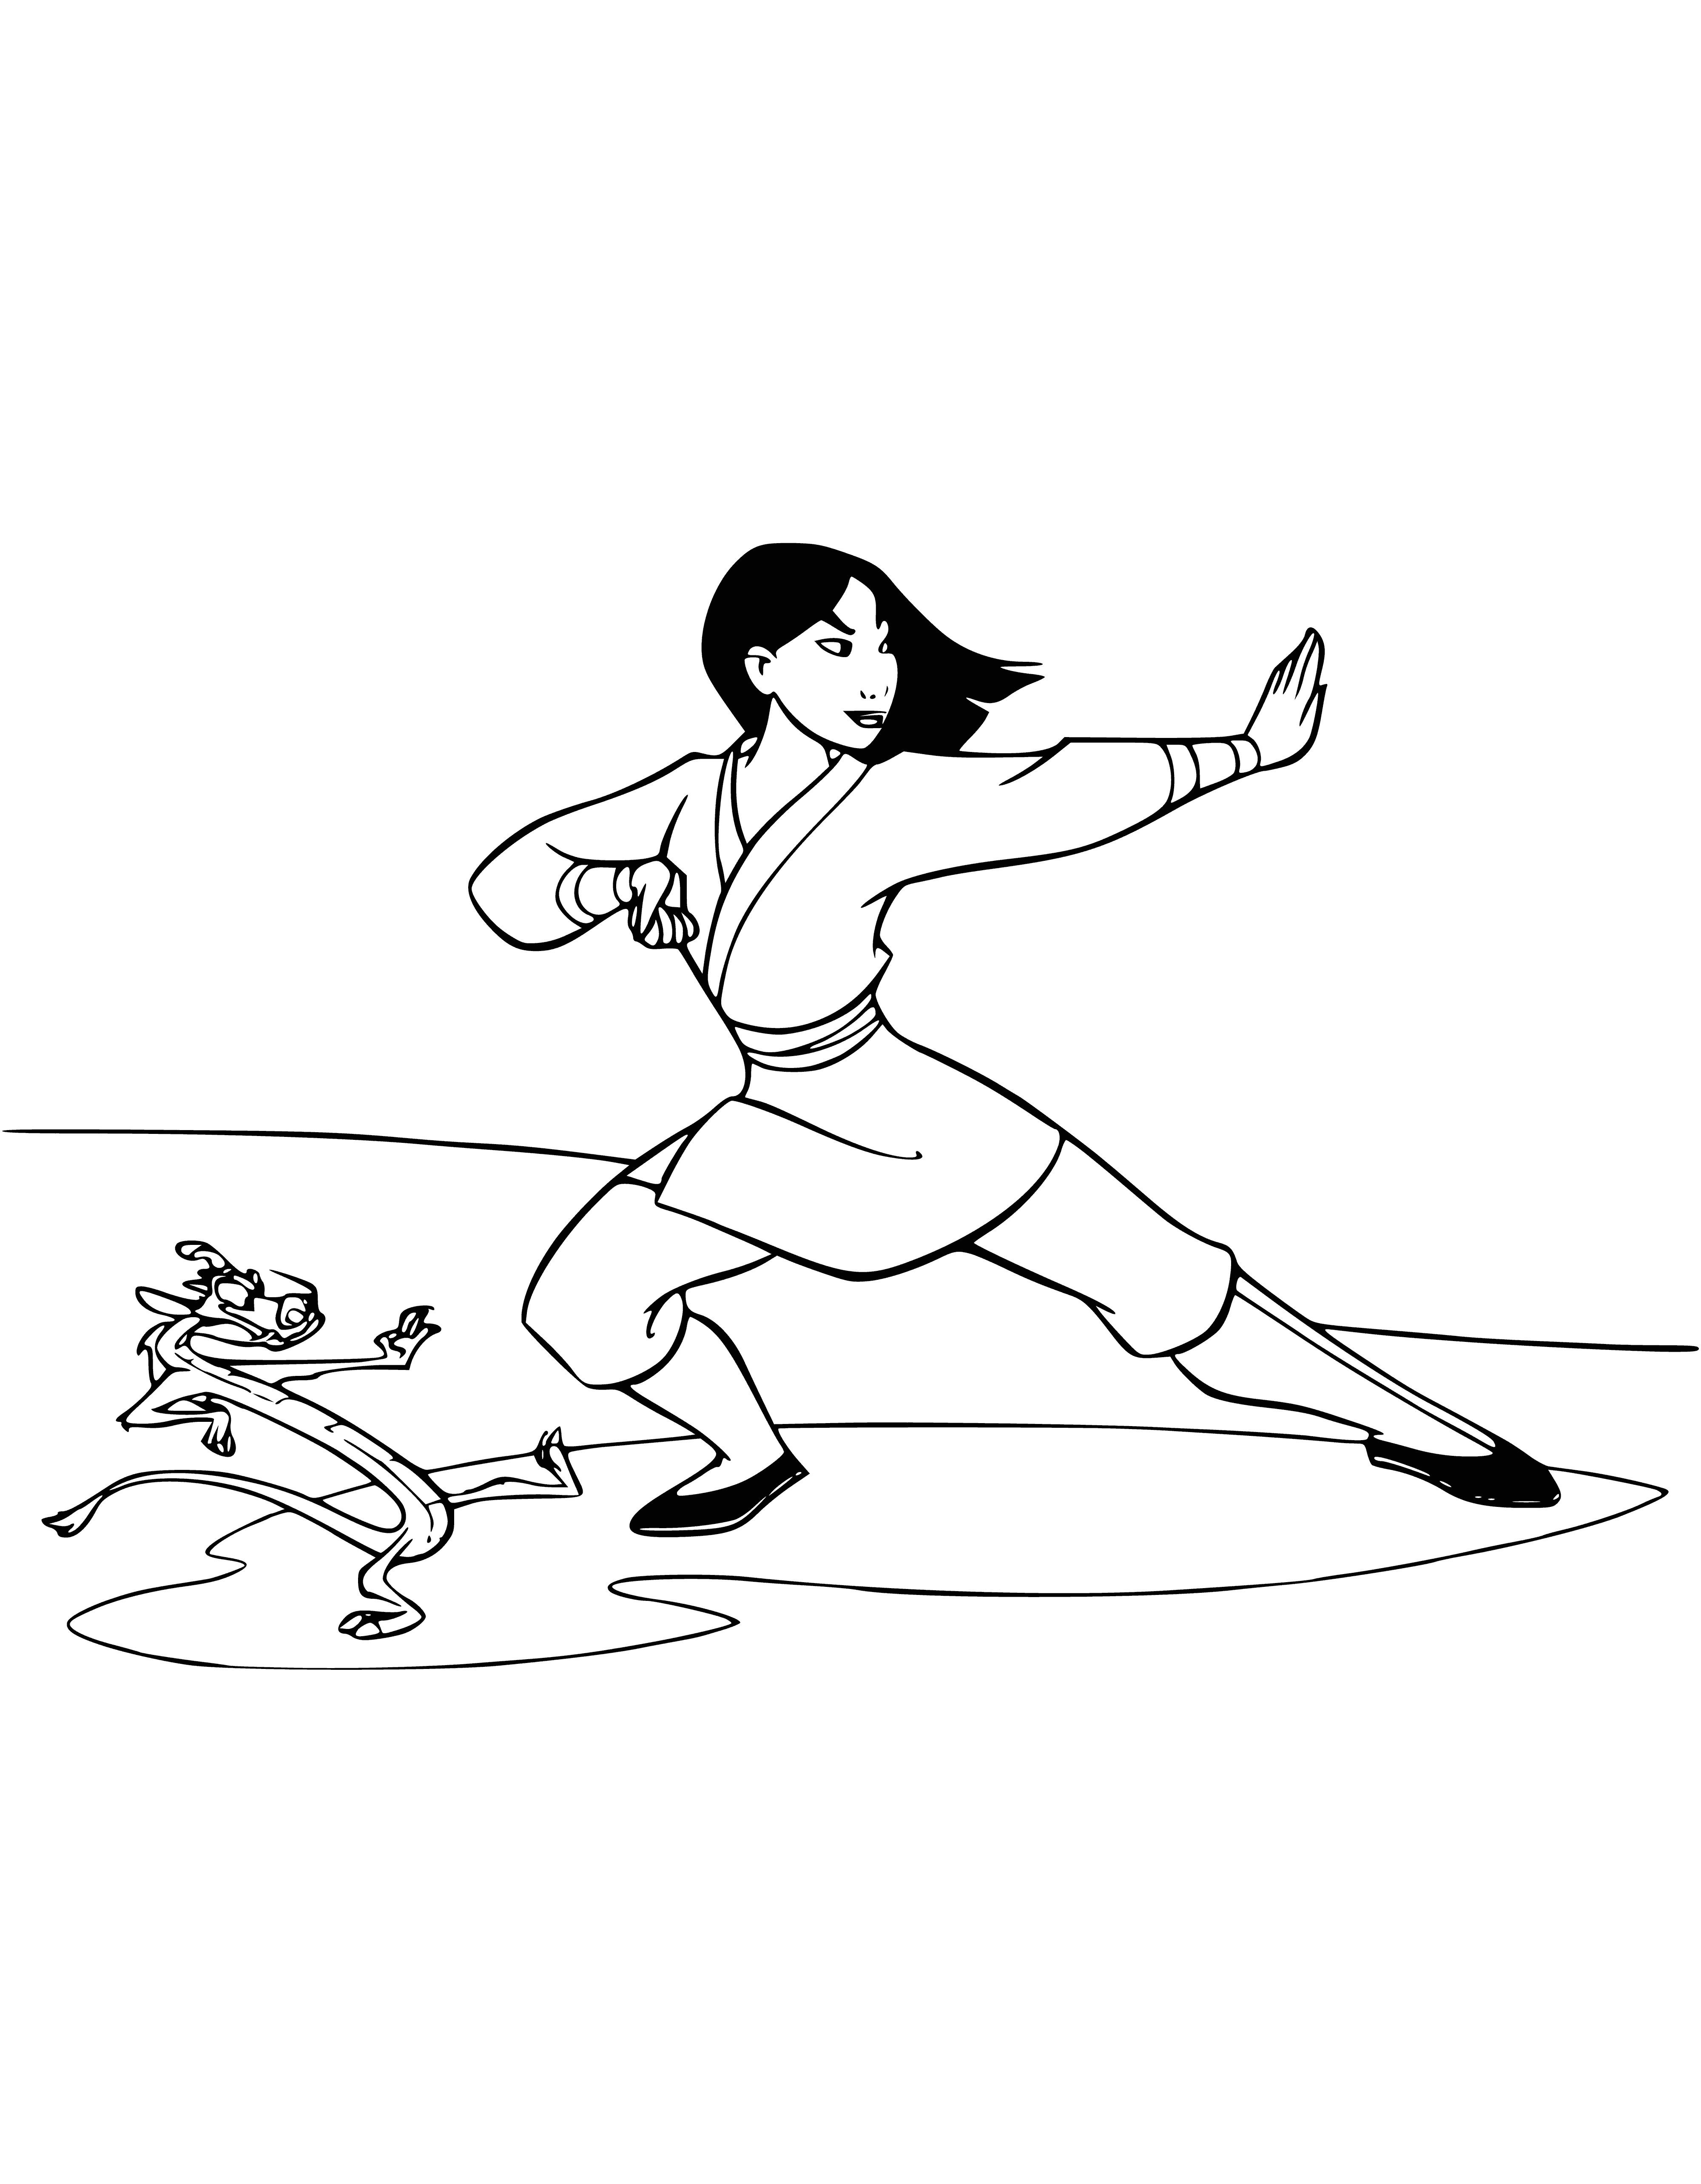 coloring page: Mulan holds Mushu, blade at feet, horse ready to ride as she prepares to face her destiny. #Disney #Mulan